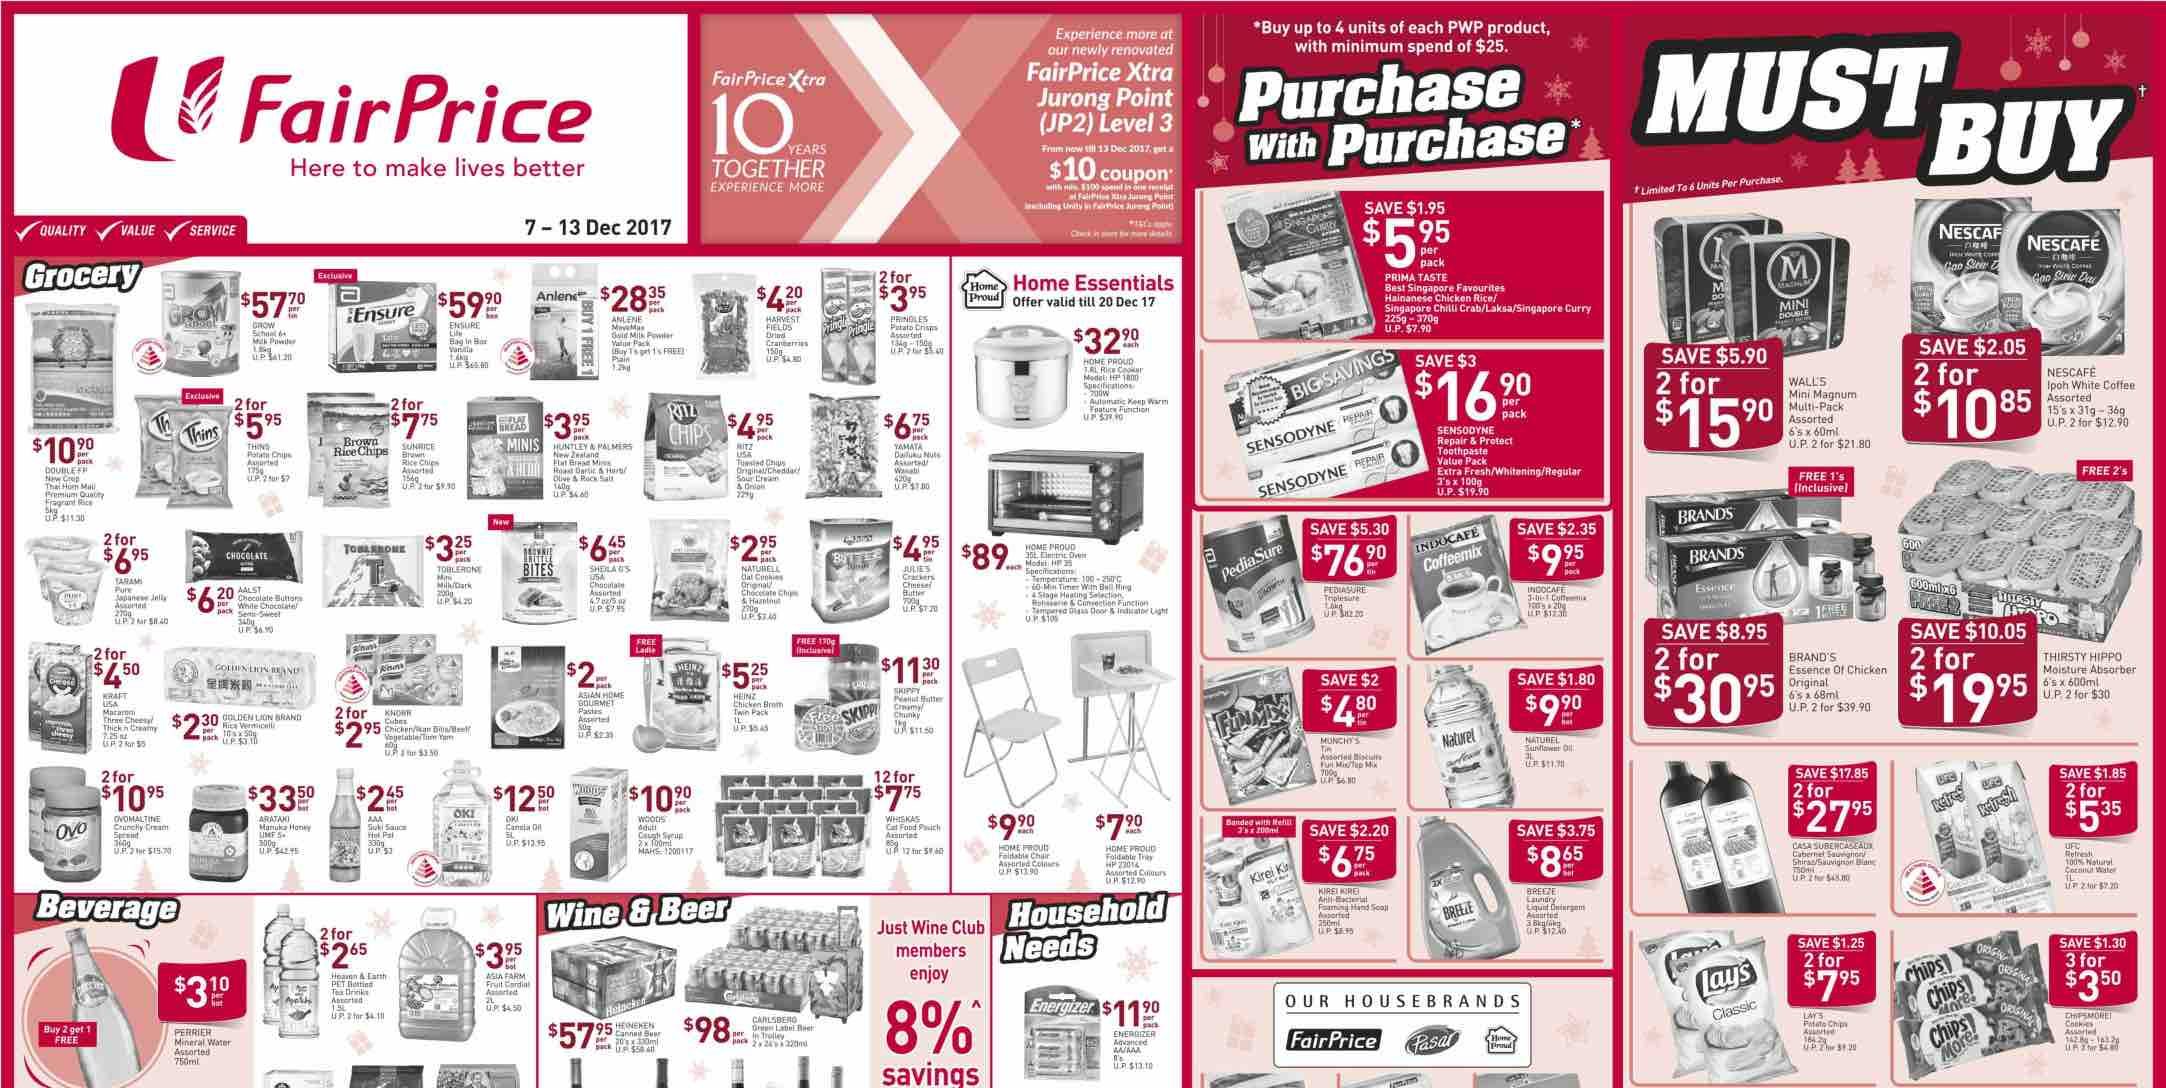 NTUC FairPrice Singapore Your Weekly Savers Promotions 7-13 Dec 2017